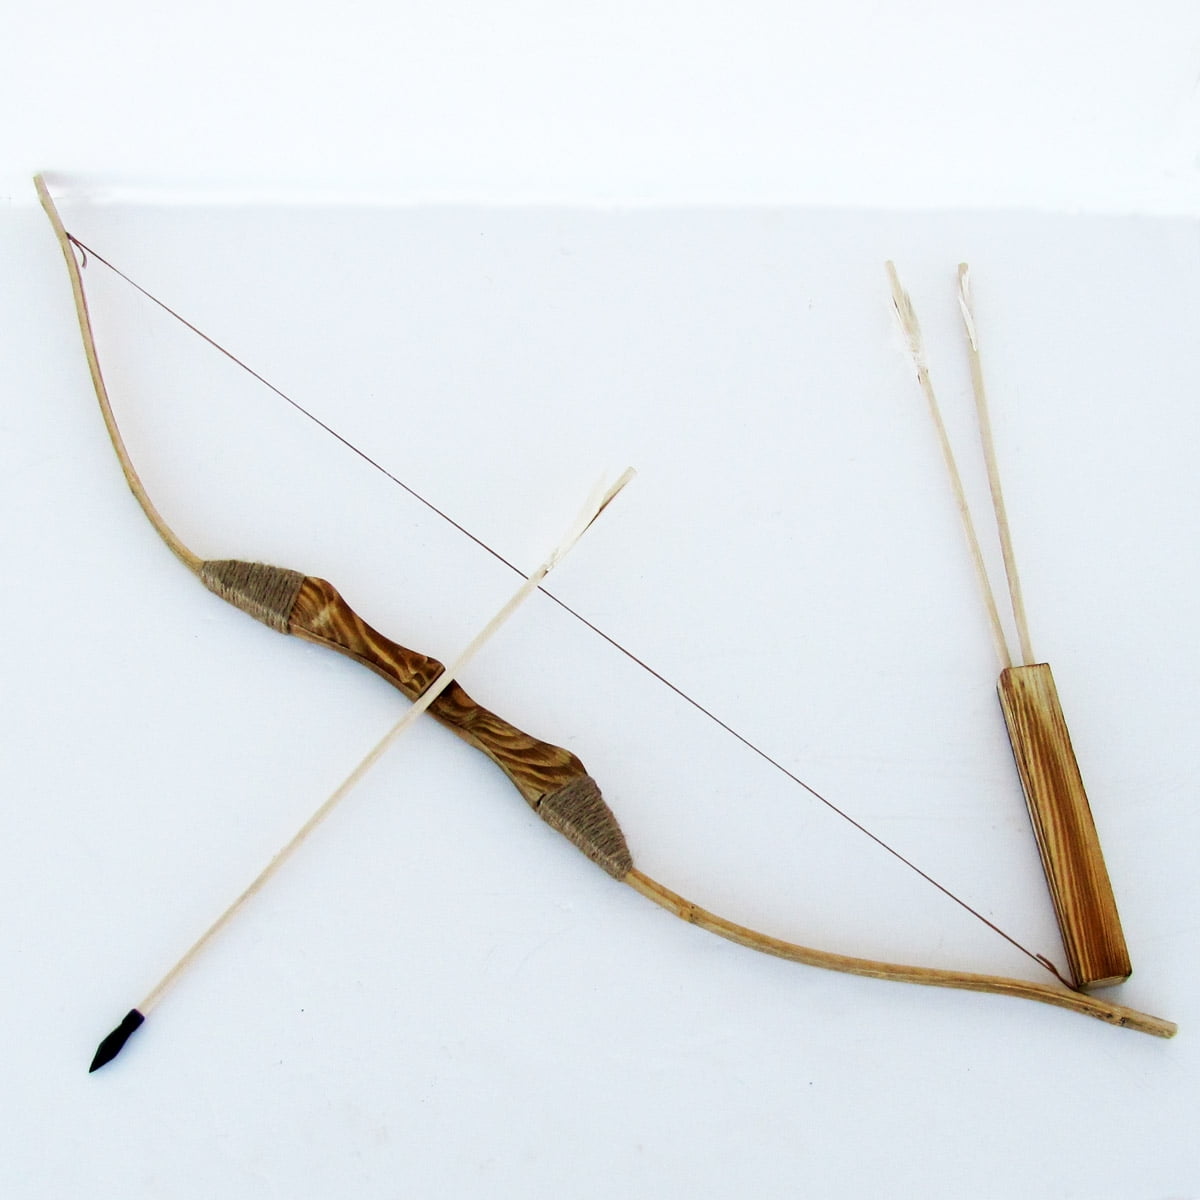 WOODEN BOW WITH 3 ARROWS AND QUIVER Wood Archery Bow for Hunting Kids Toy Gift